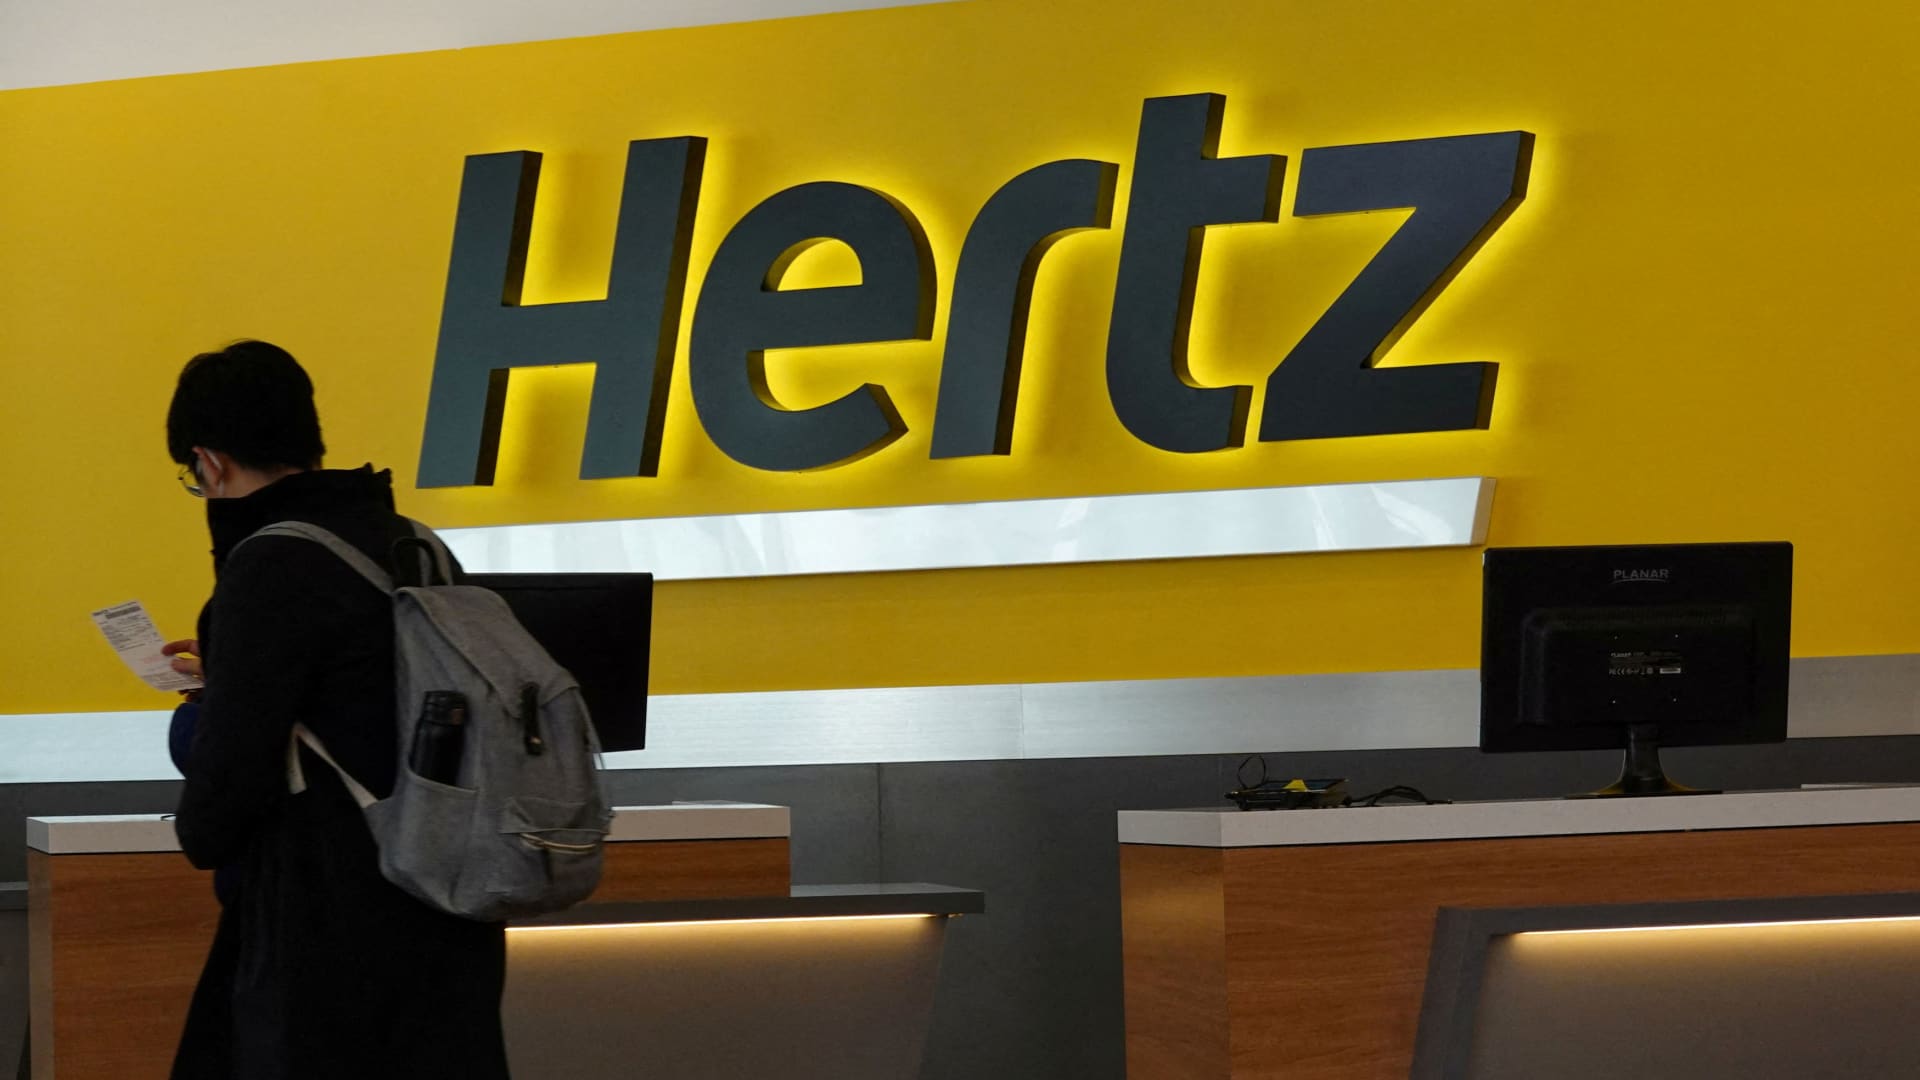 Stocks making the biggest moves midday: Hertz, Ford, Keurig Dr Pepper and more